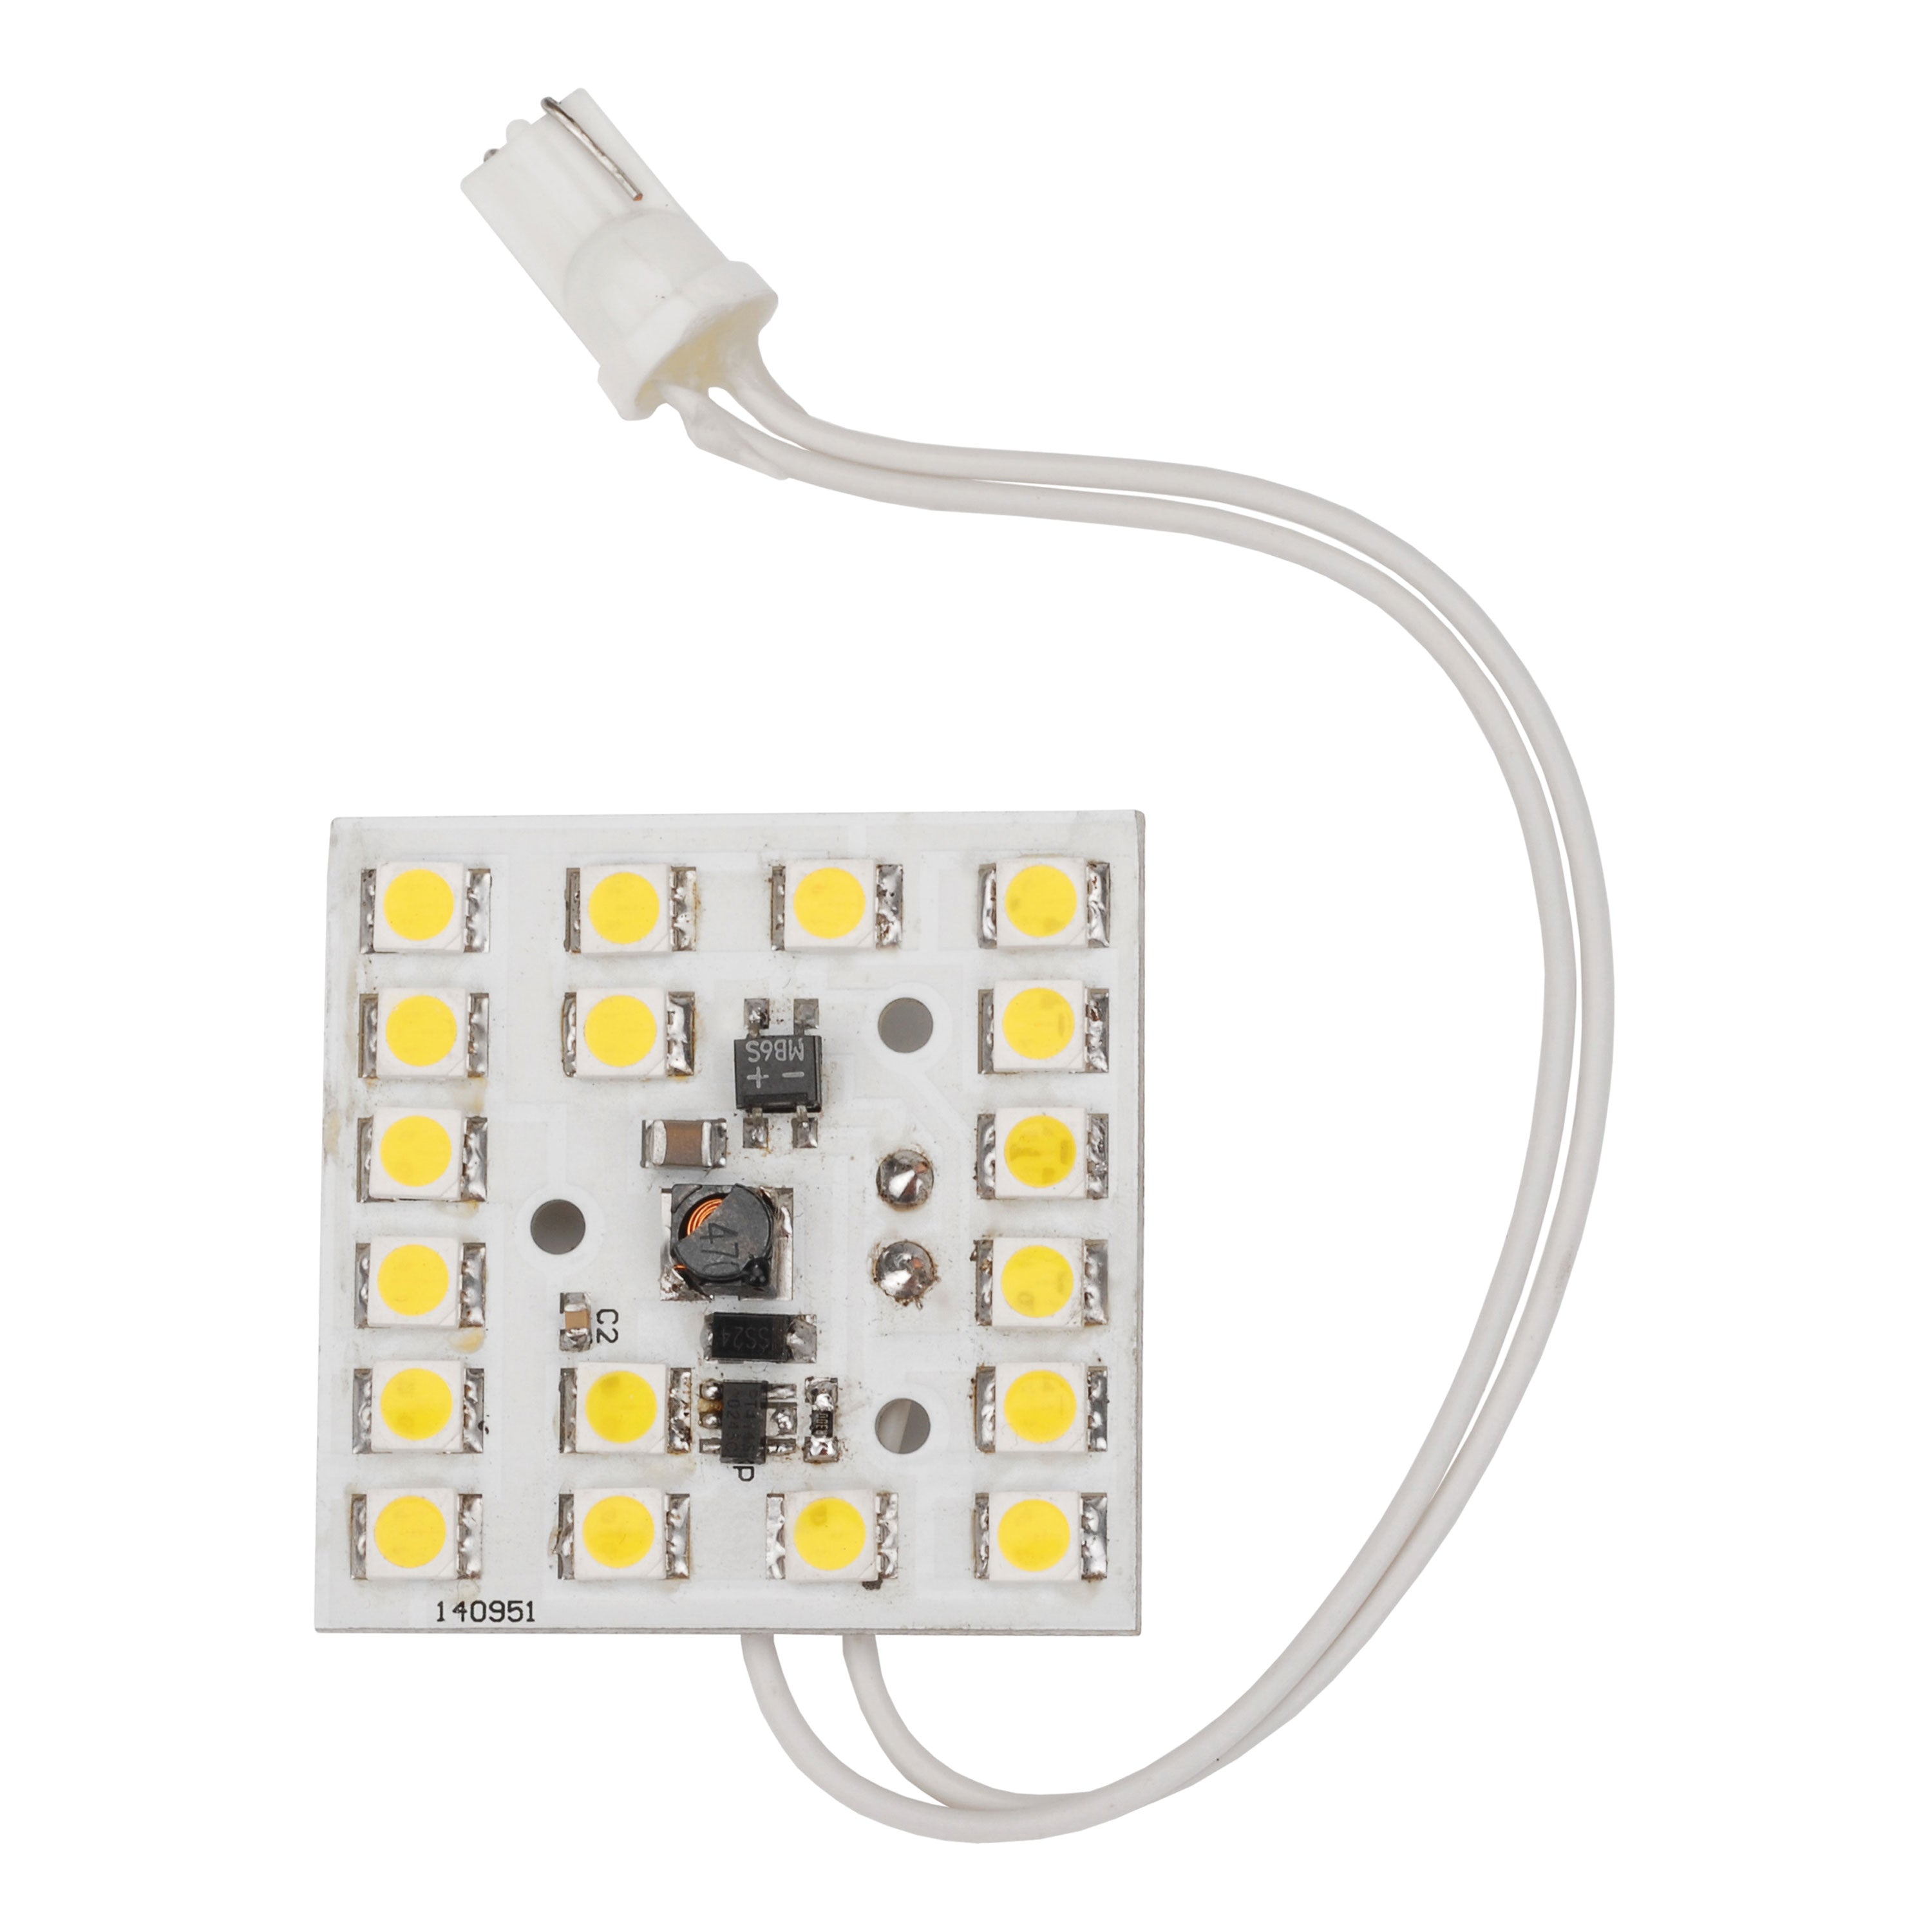 AP Products 016-BL300 Brilliant Light Series 300 Lumen LED Replacement Board